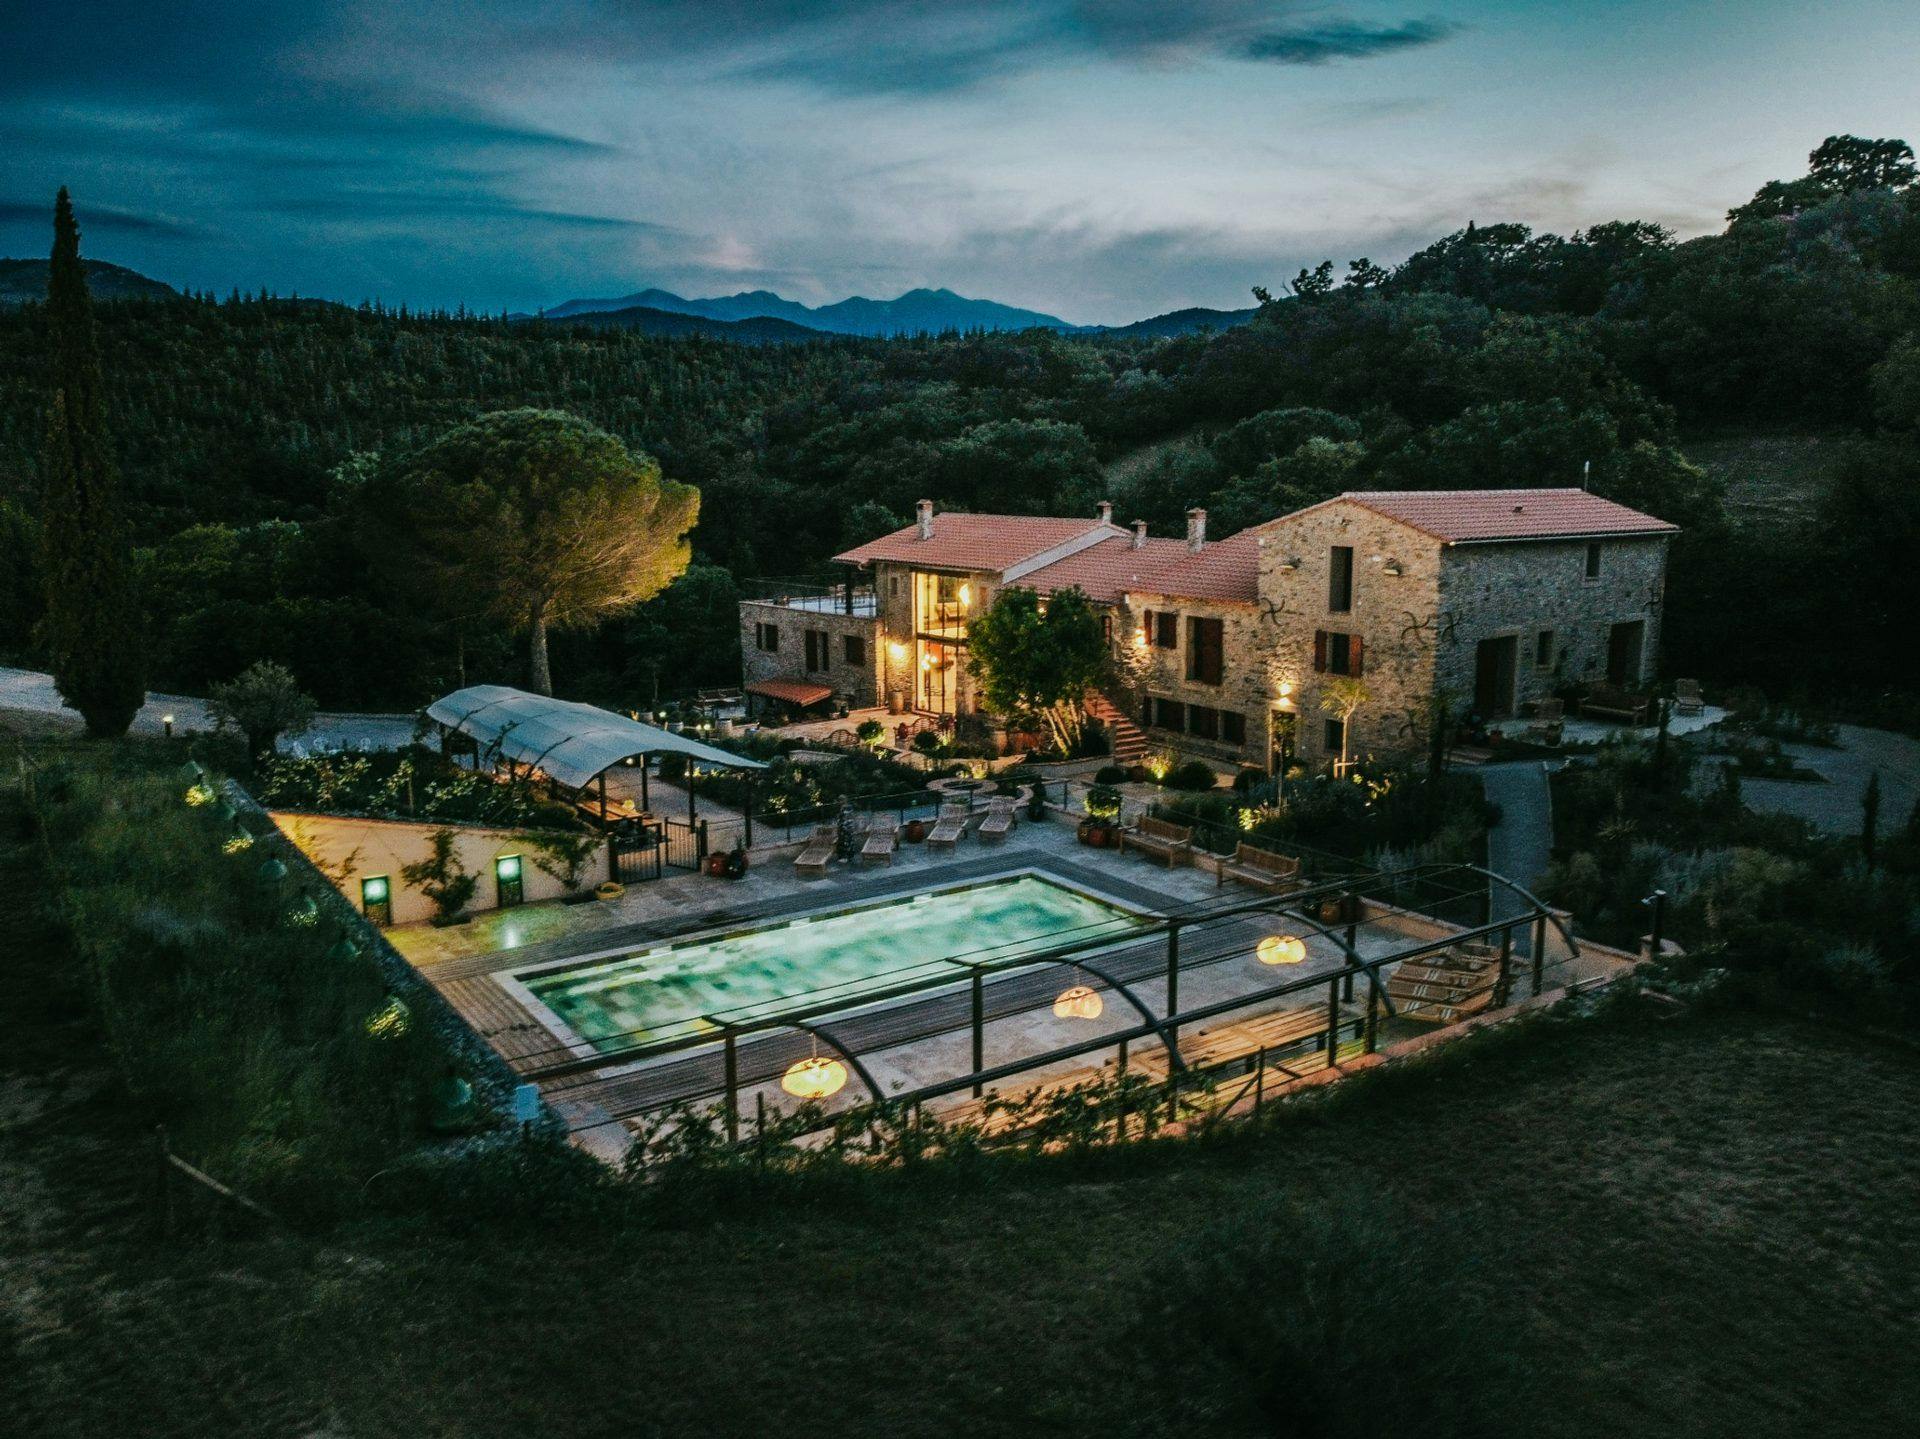 Soulful Hideaway; your journey back to wholeness retreat in the south of France